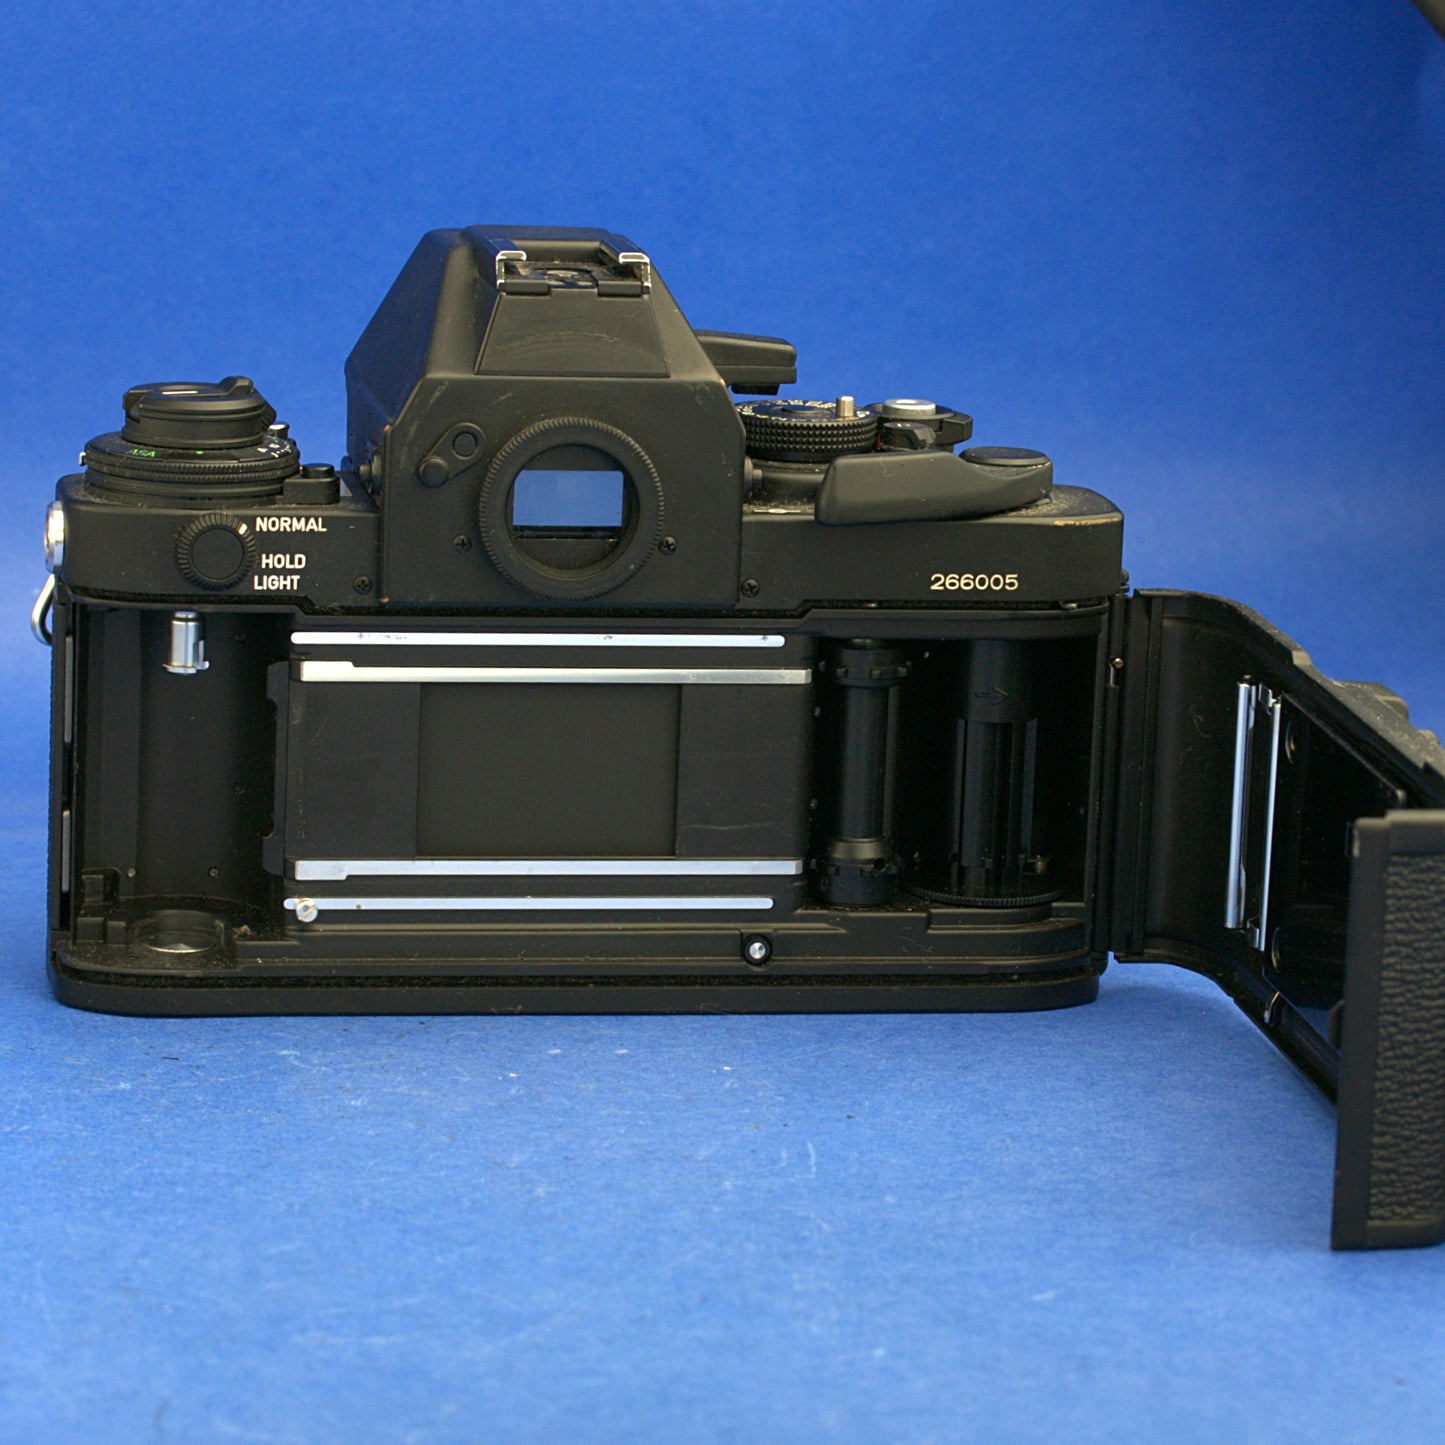 Canon F-1N Film Camera Body with AE Finder And Data Back